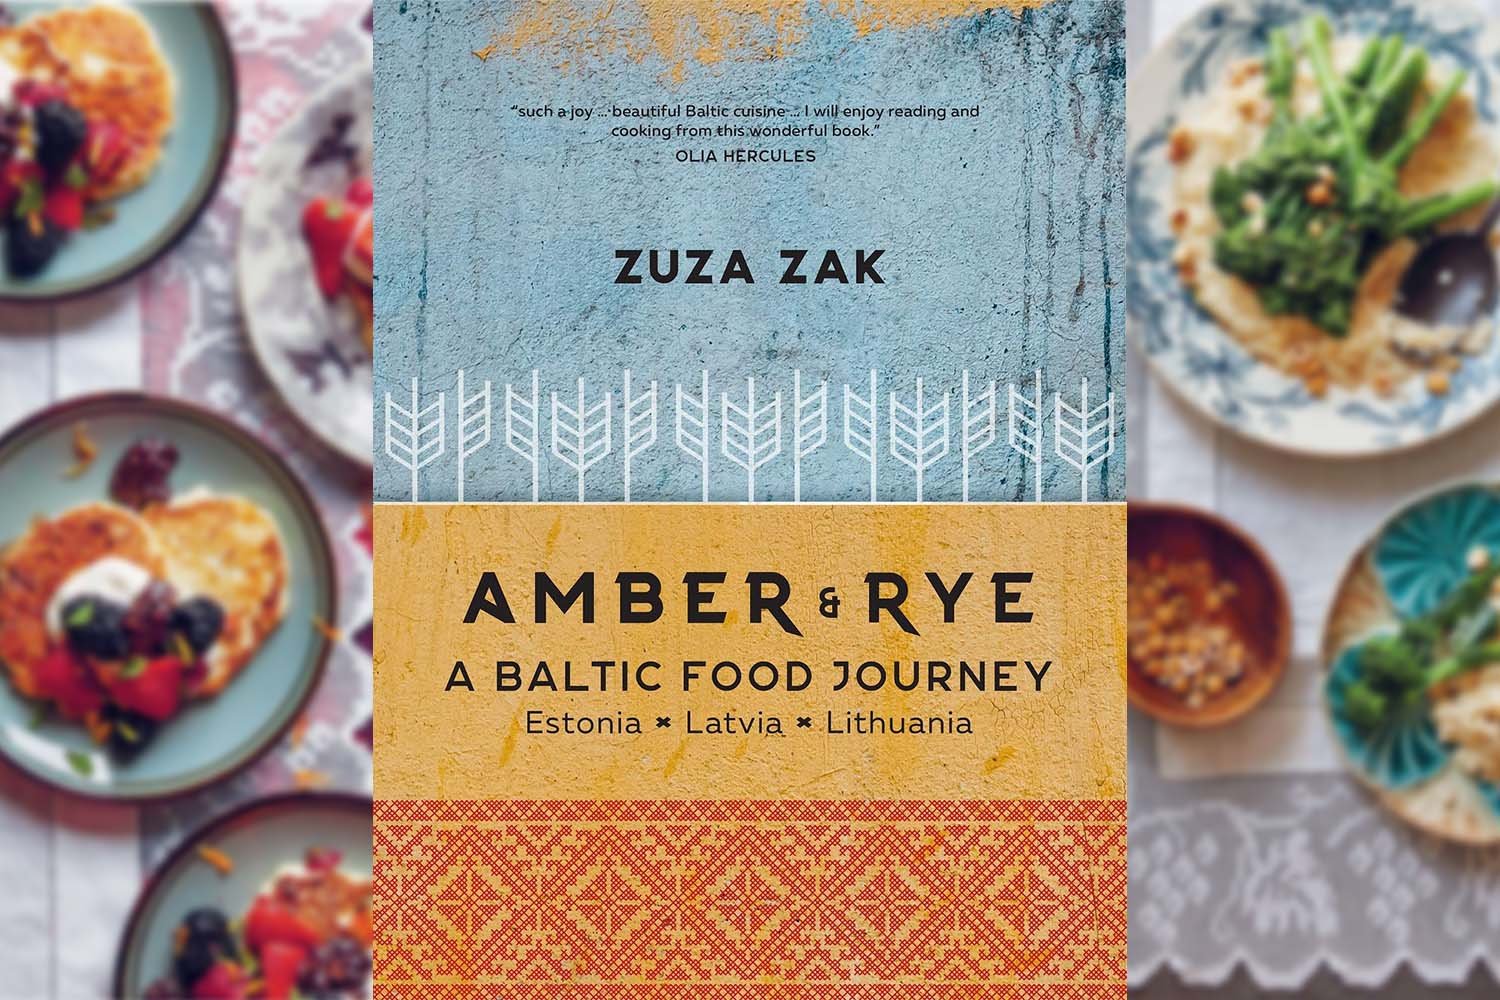 Behind The Cookbook – Amber & Rye: A Baltic Food Journey